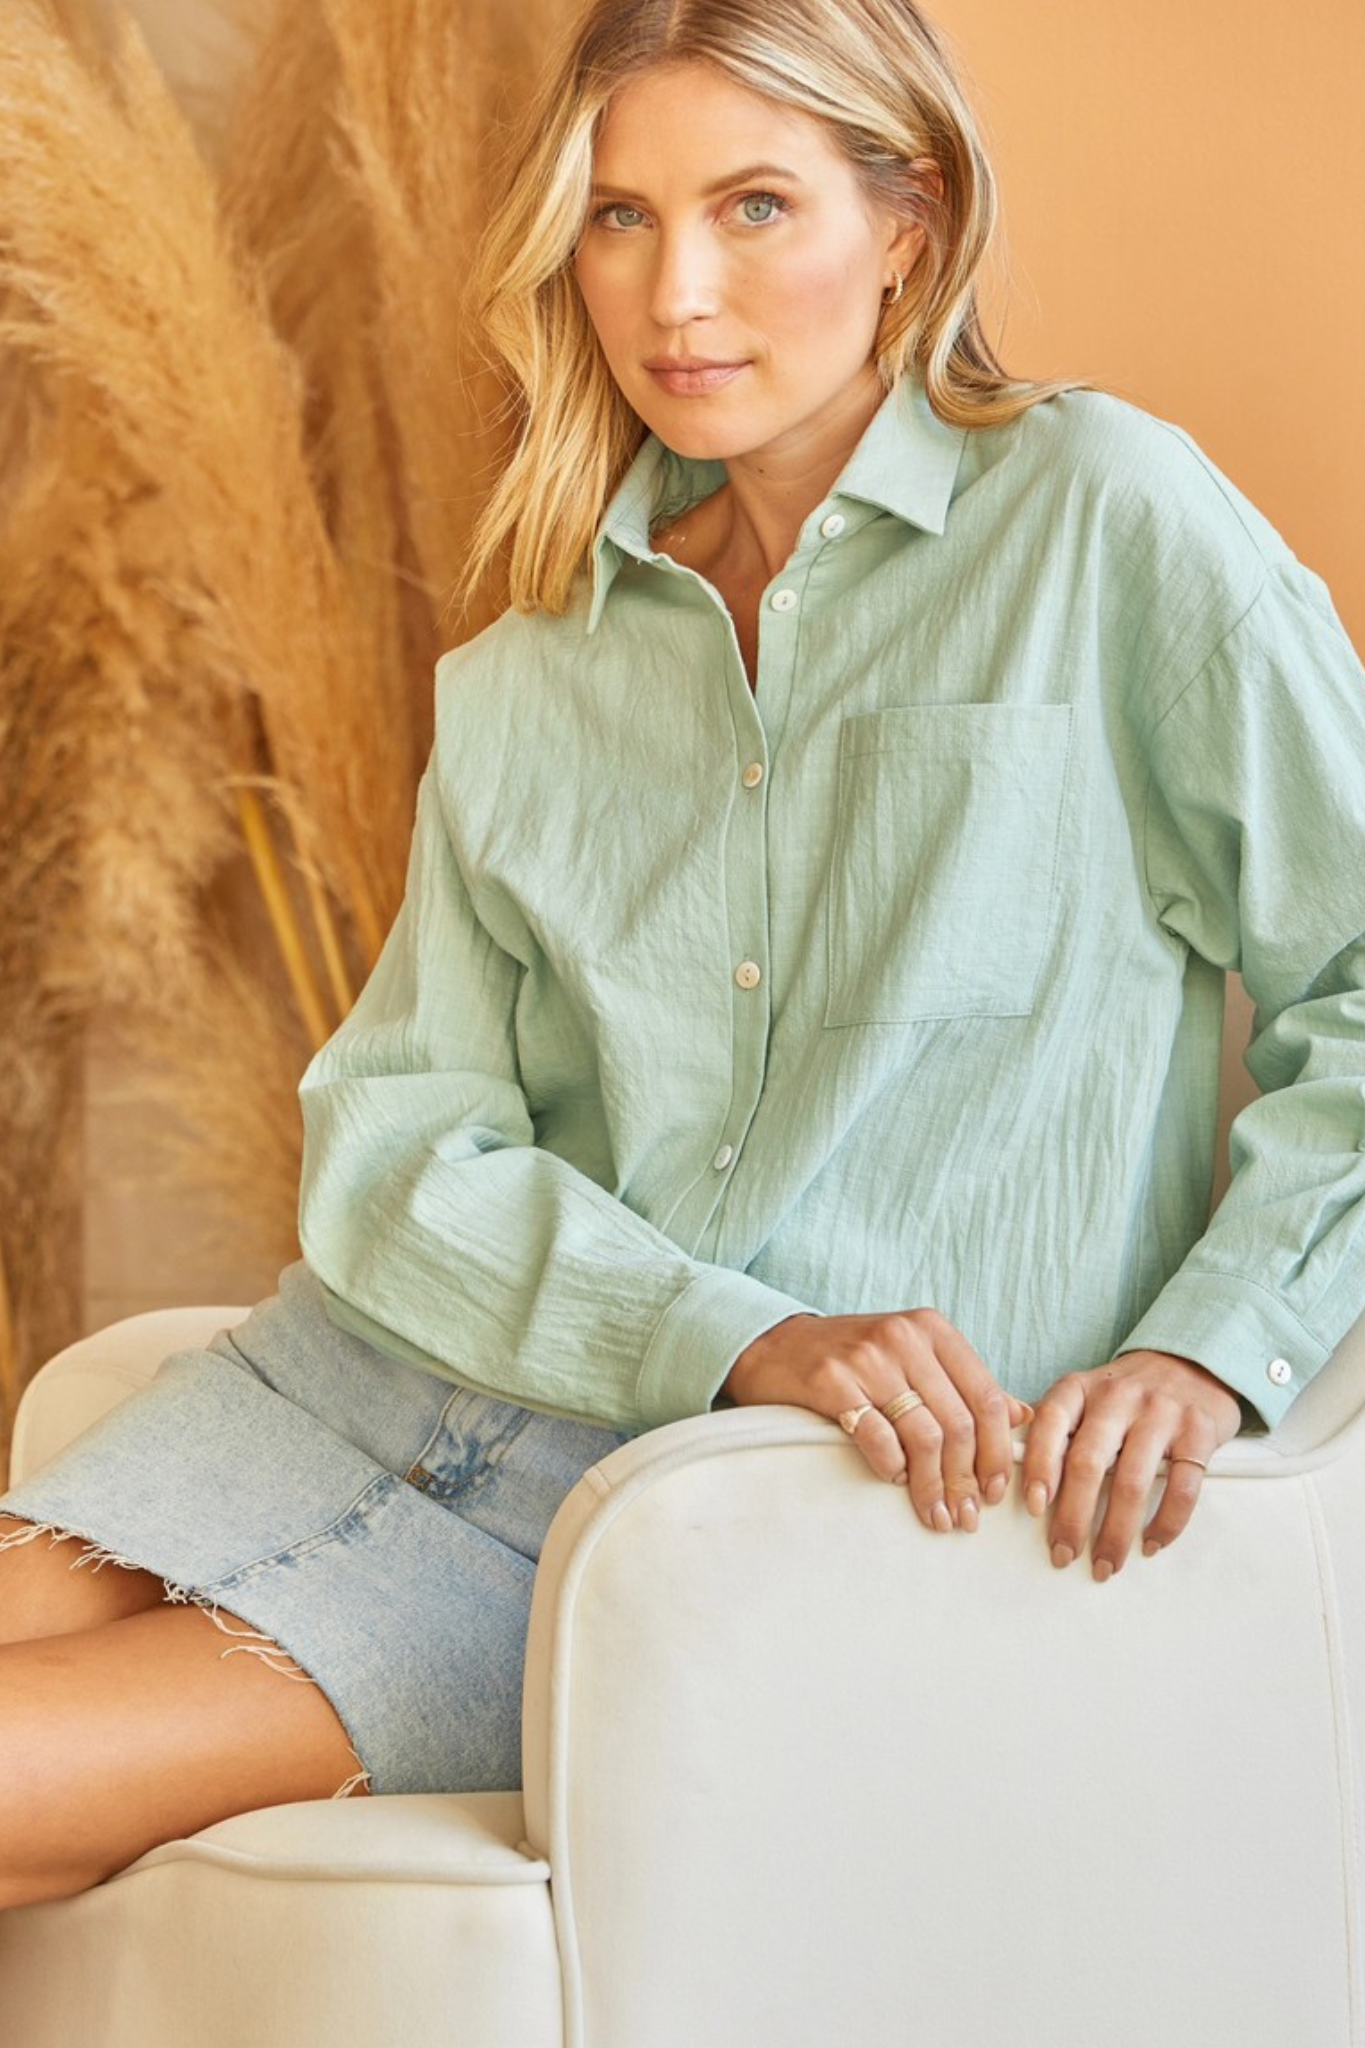 View 4 of Laurel Button Down Shirt, a Tops from Larrea Cove. Detail: .